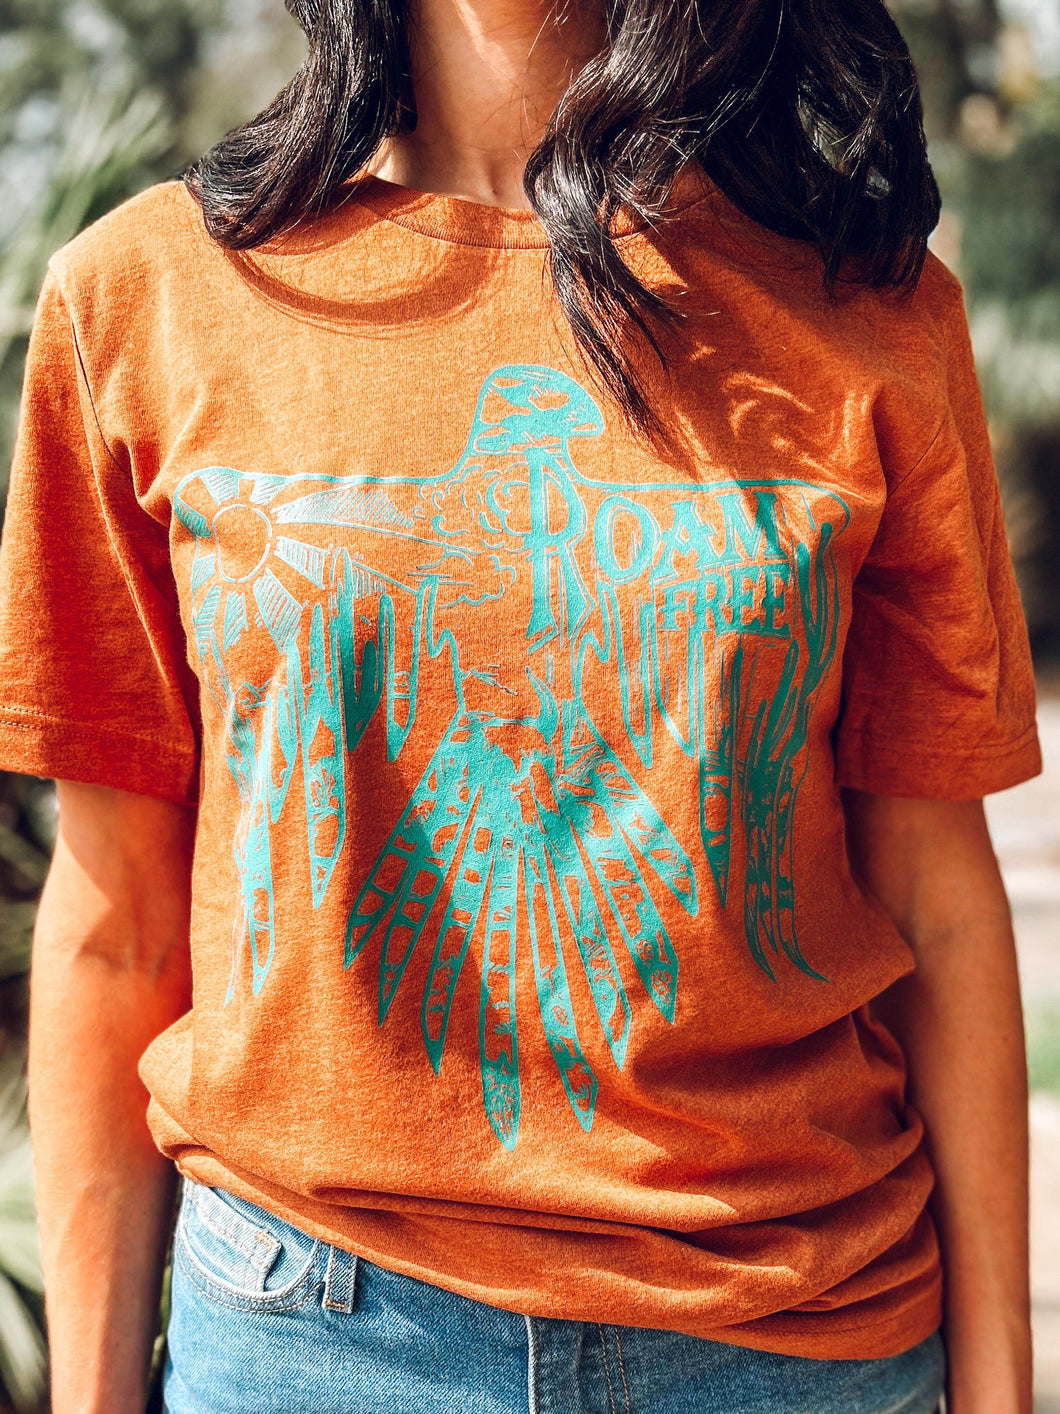 picture 1 girl wearing Roam Free Thunderbird Tee With Turquoise Graphic 